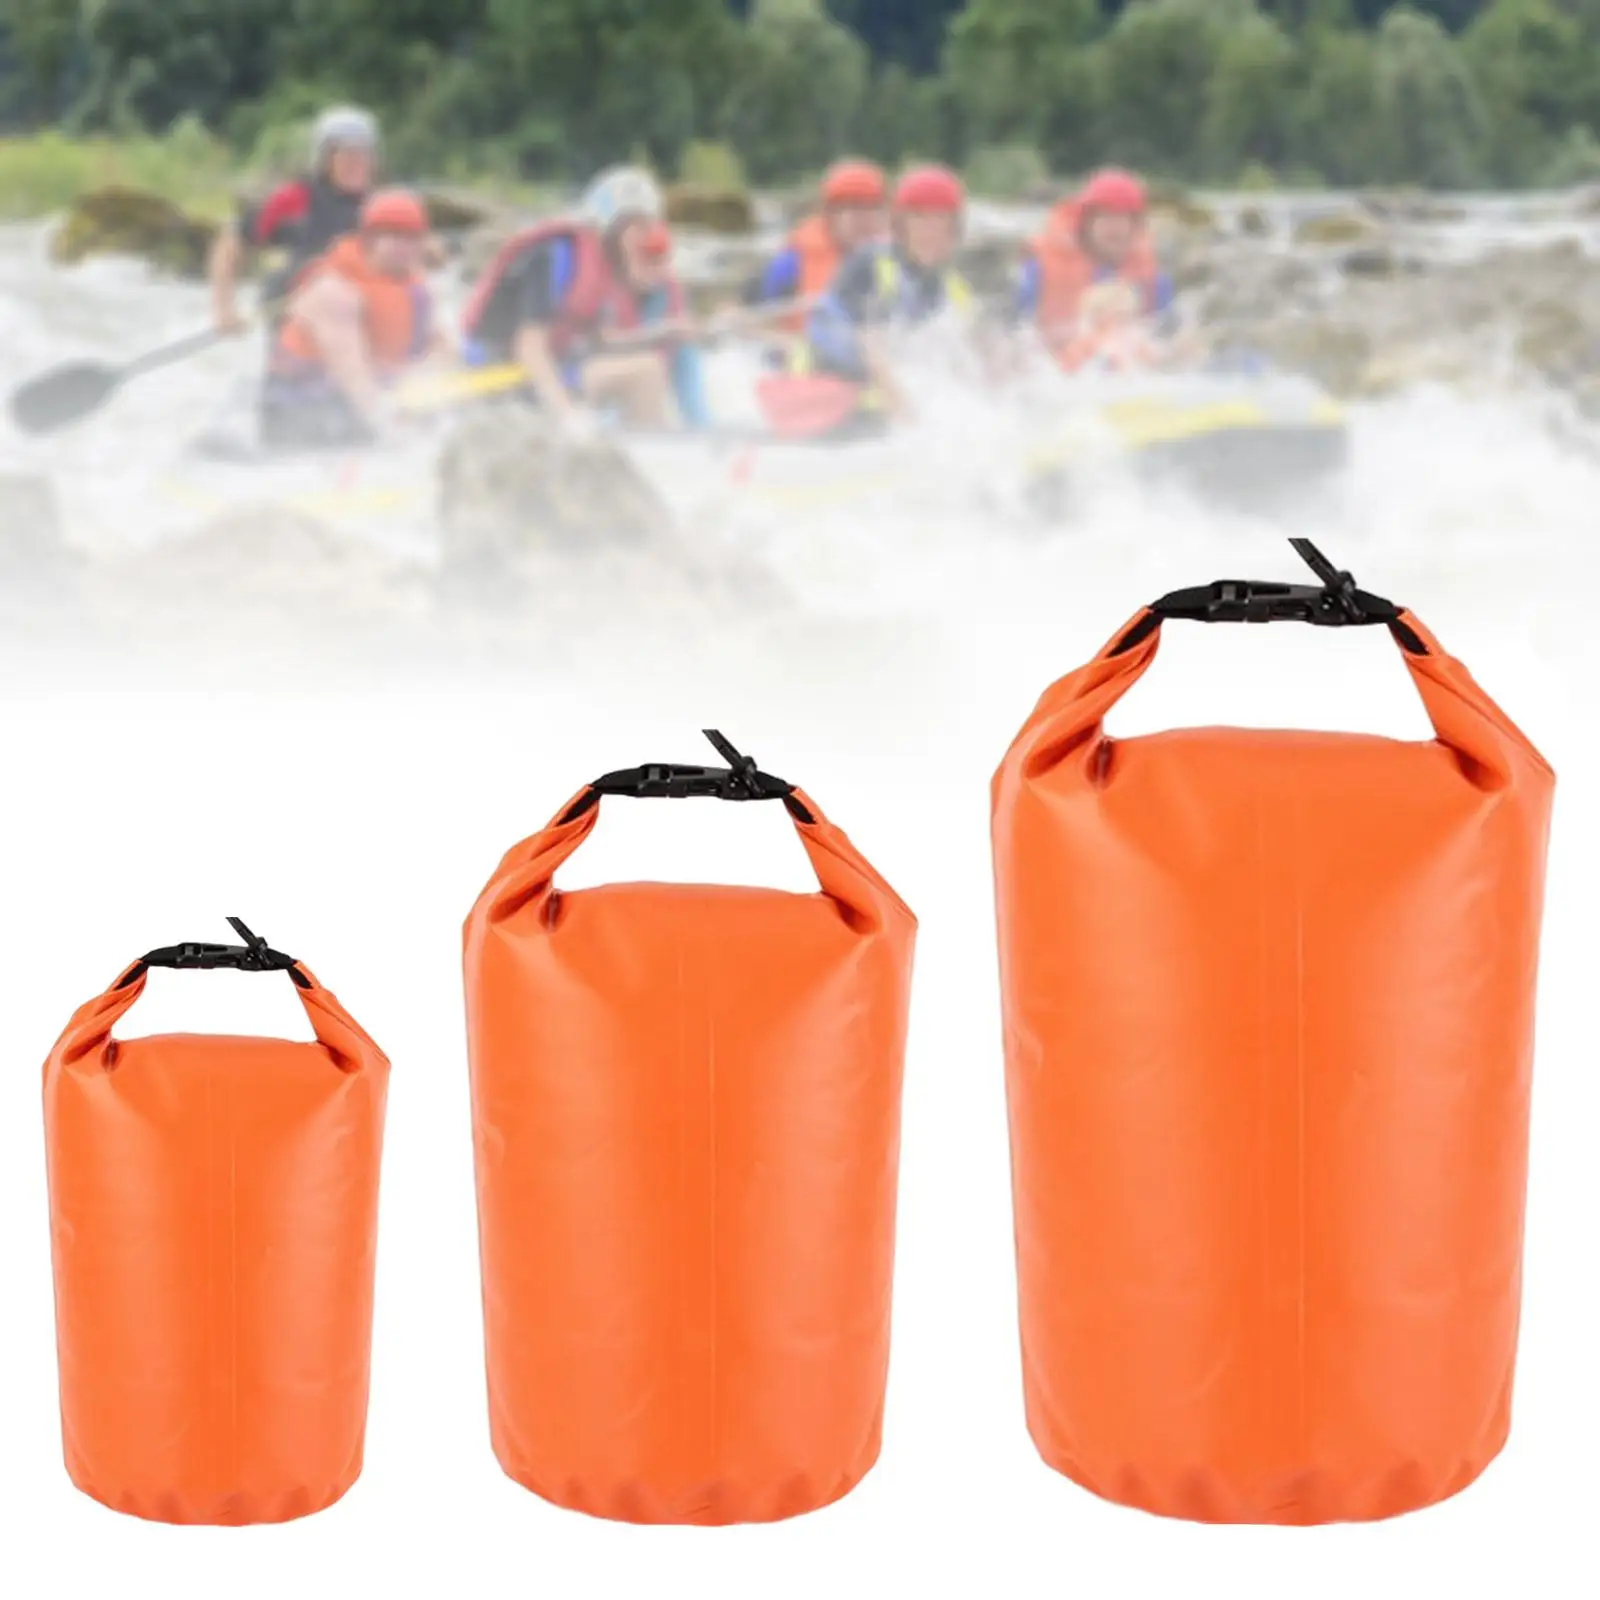 3Pcs Waterproof Dry Bags Roll Top Leakproof Portable 8L 40L 70L Dry Sack Bags for Kayaking Boating Canoeing Rafting Camping